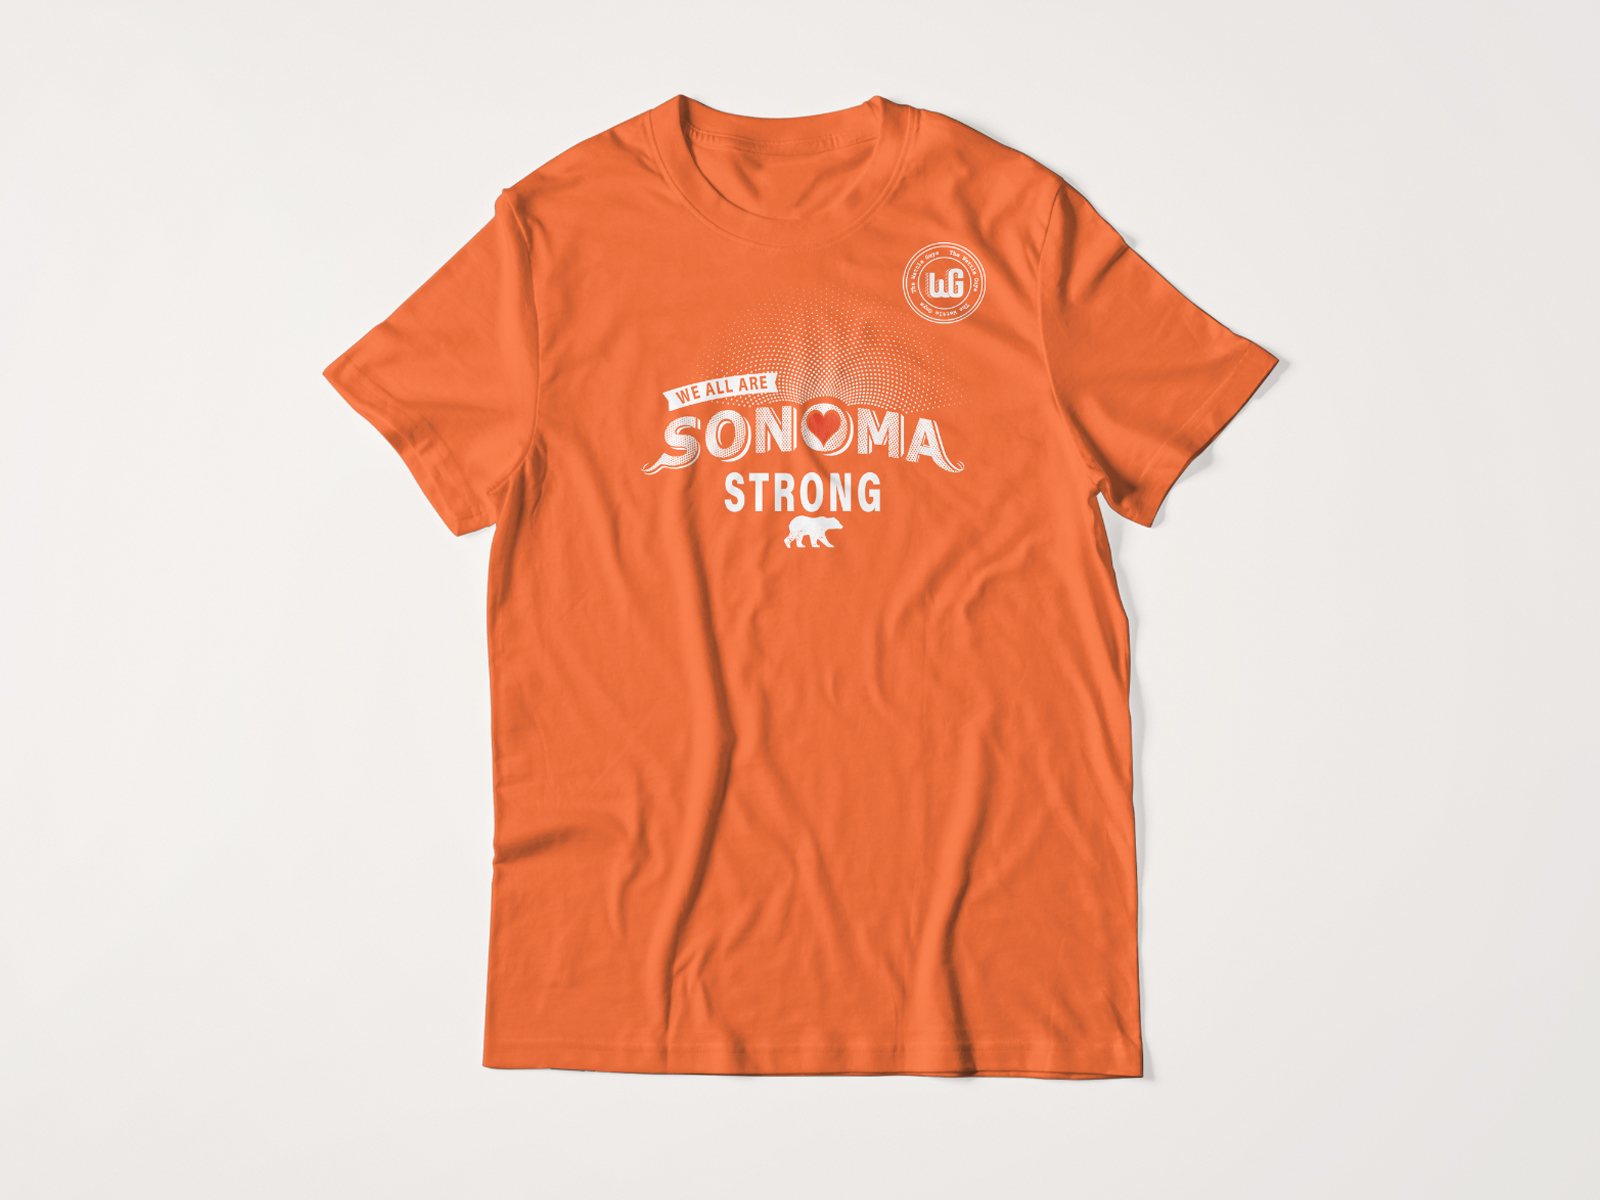 Sonoma Strong t-shirt